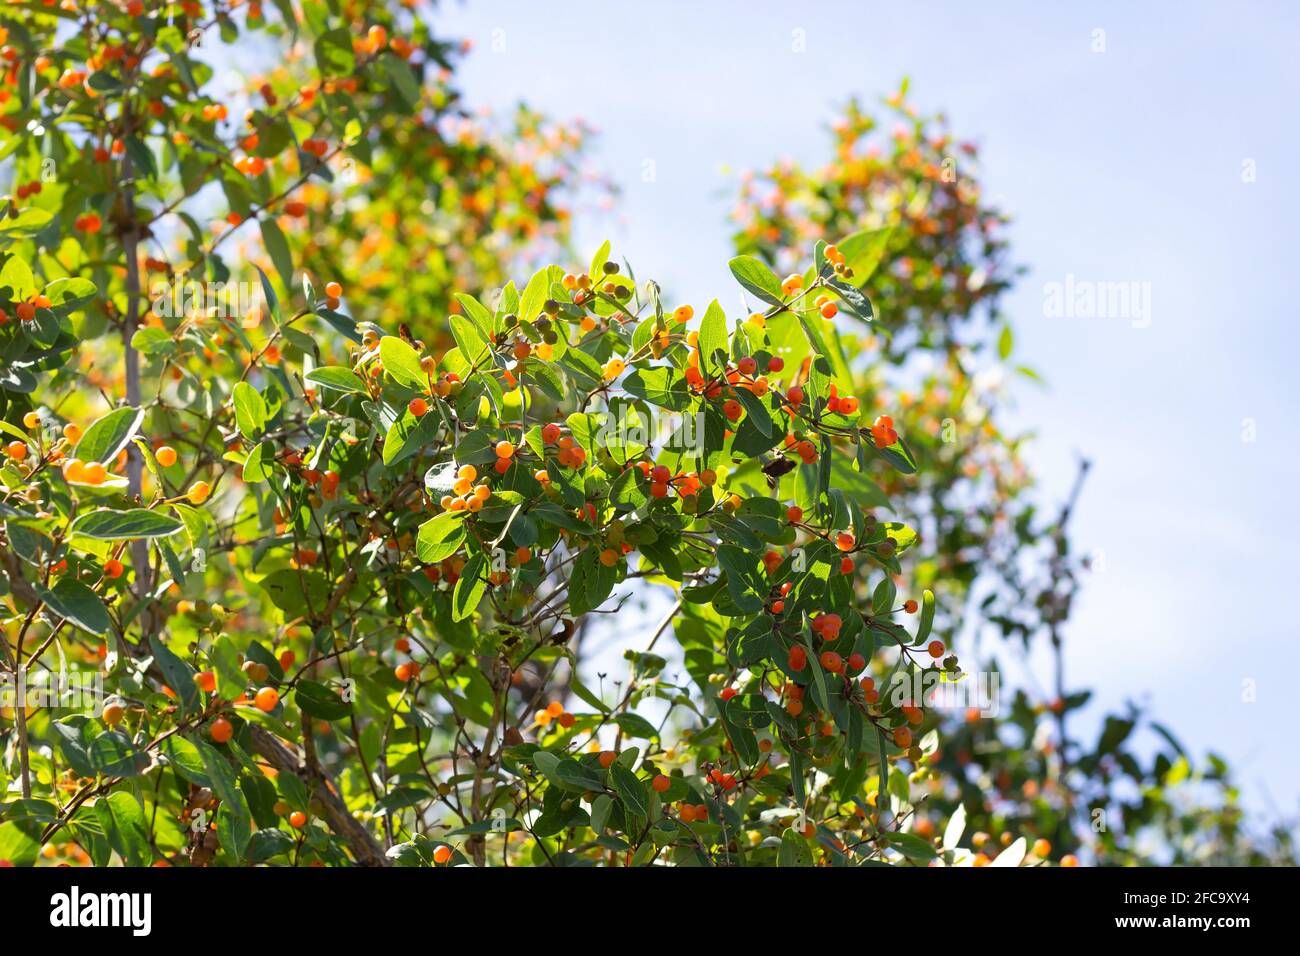 Small-leaved honeysuckle (Lonicera microphylla) branches with orange berries and green leaves in the garden in summer. Stock Photo